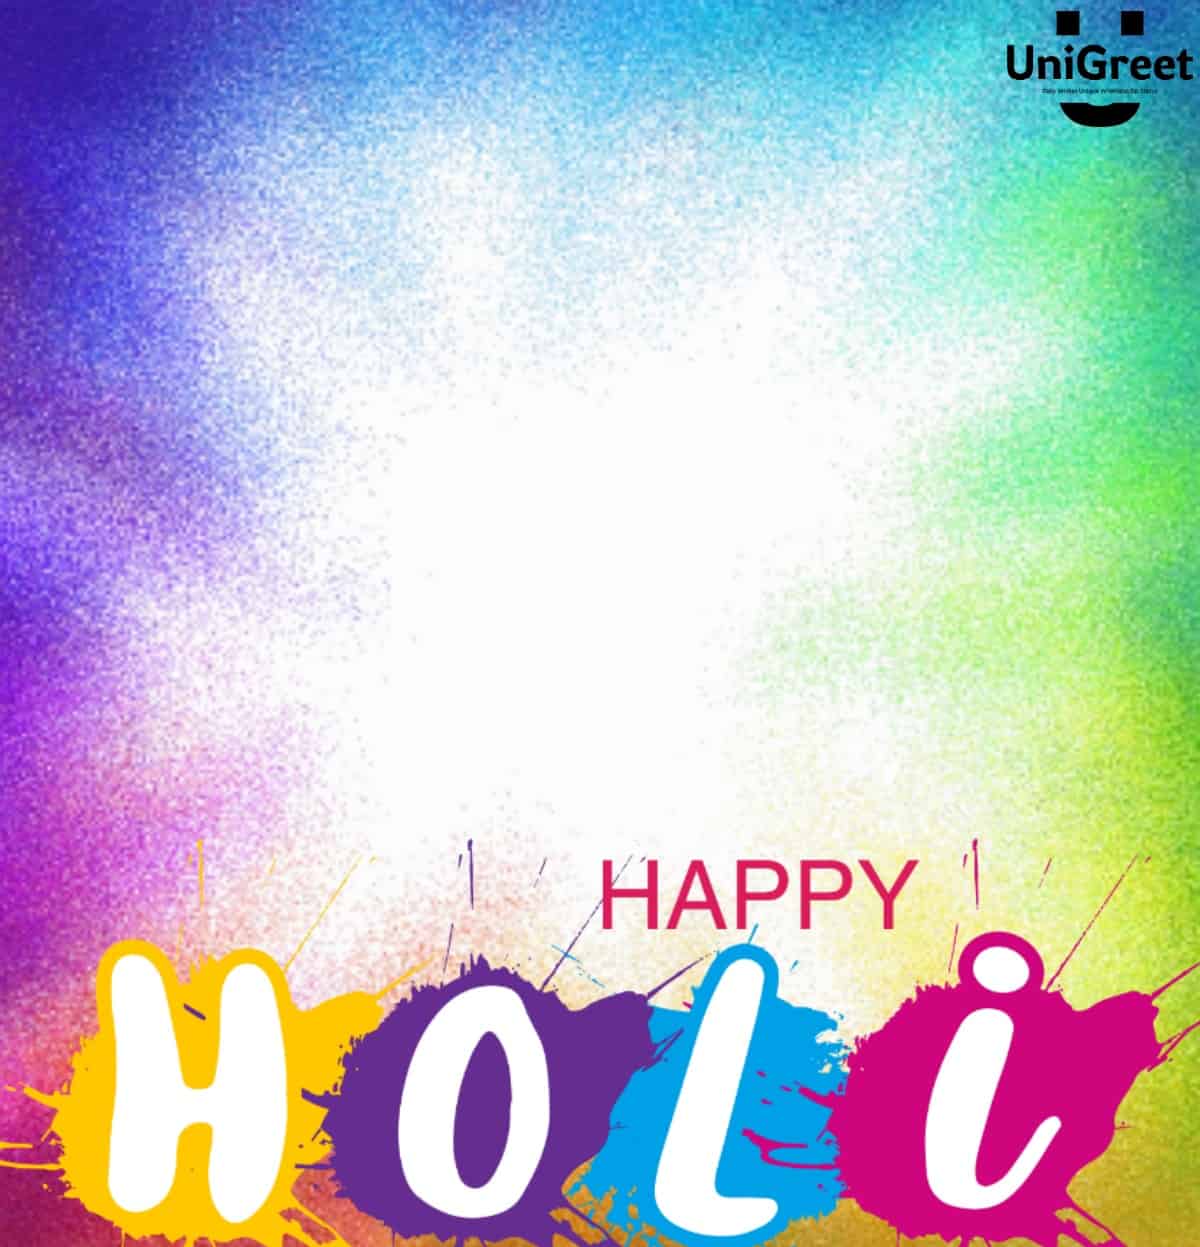 Best Holi Background Images Download For Picsart, Photoshop Photo ...